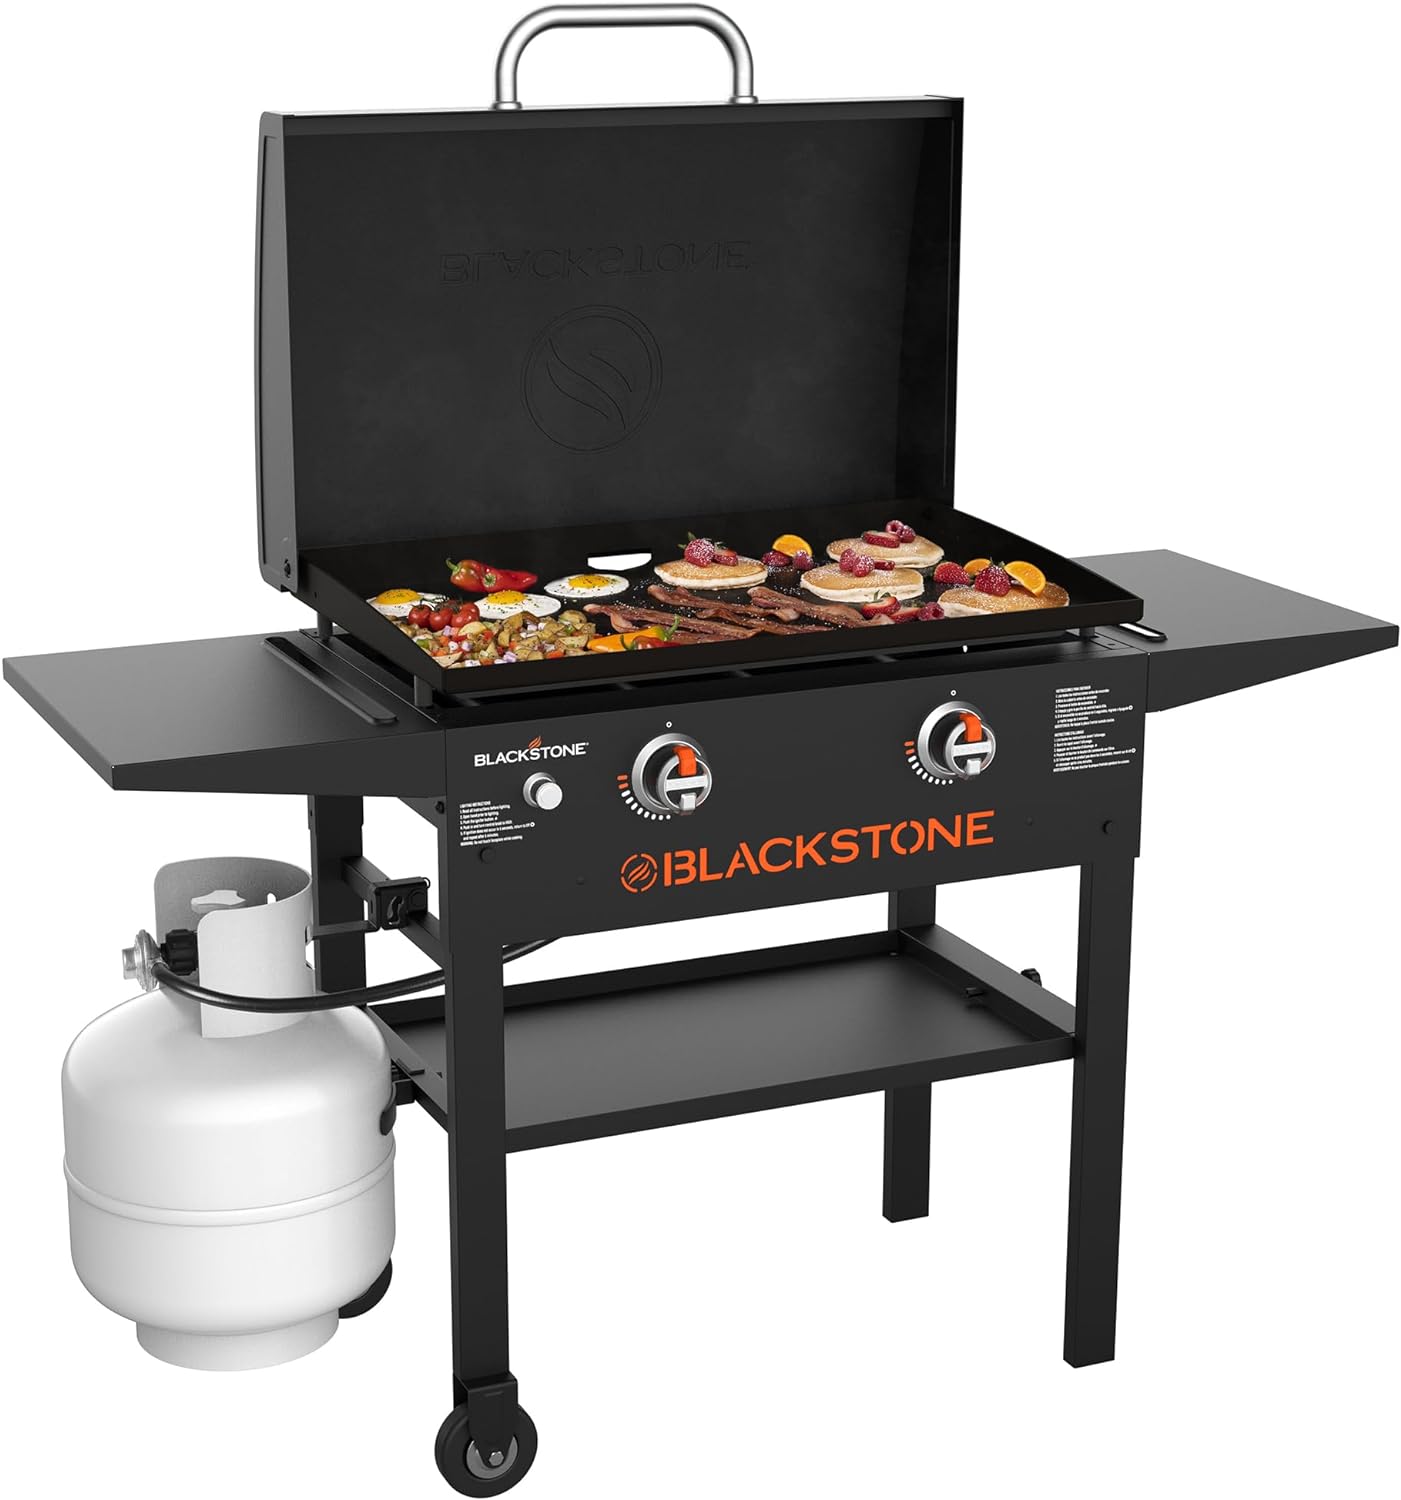 Blackstone 1883 Gas Hood & Side Shelves Heavy Duty Flat Top Griddle Grill Station for Kitchen